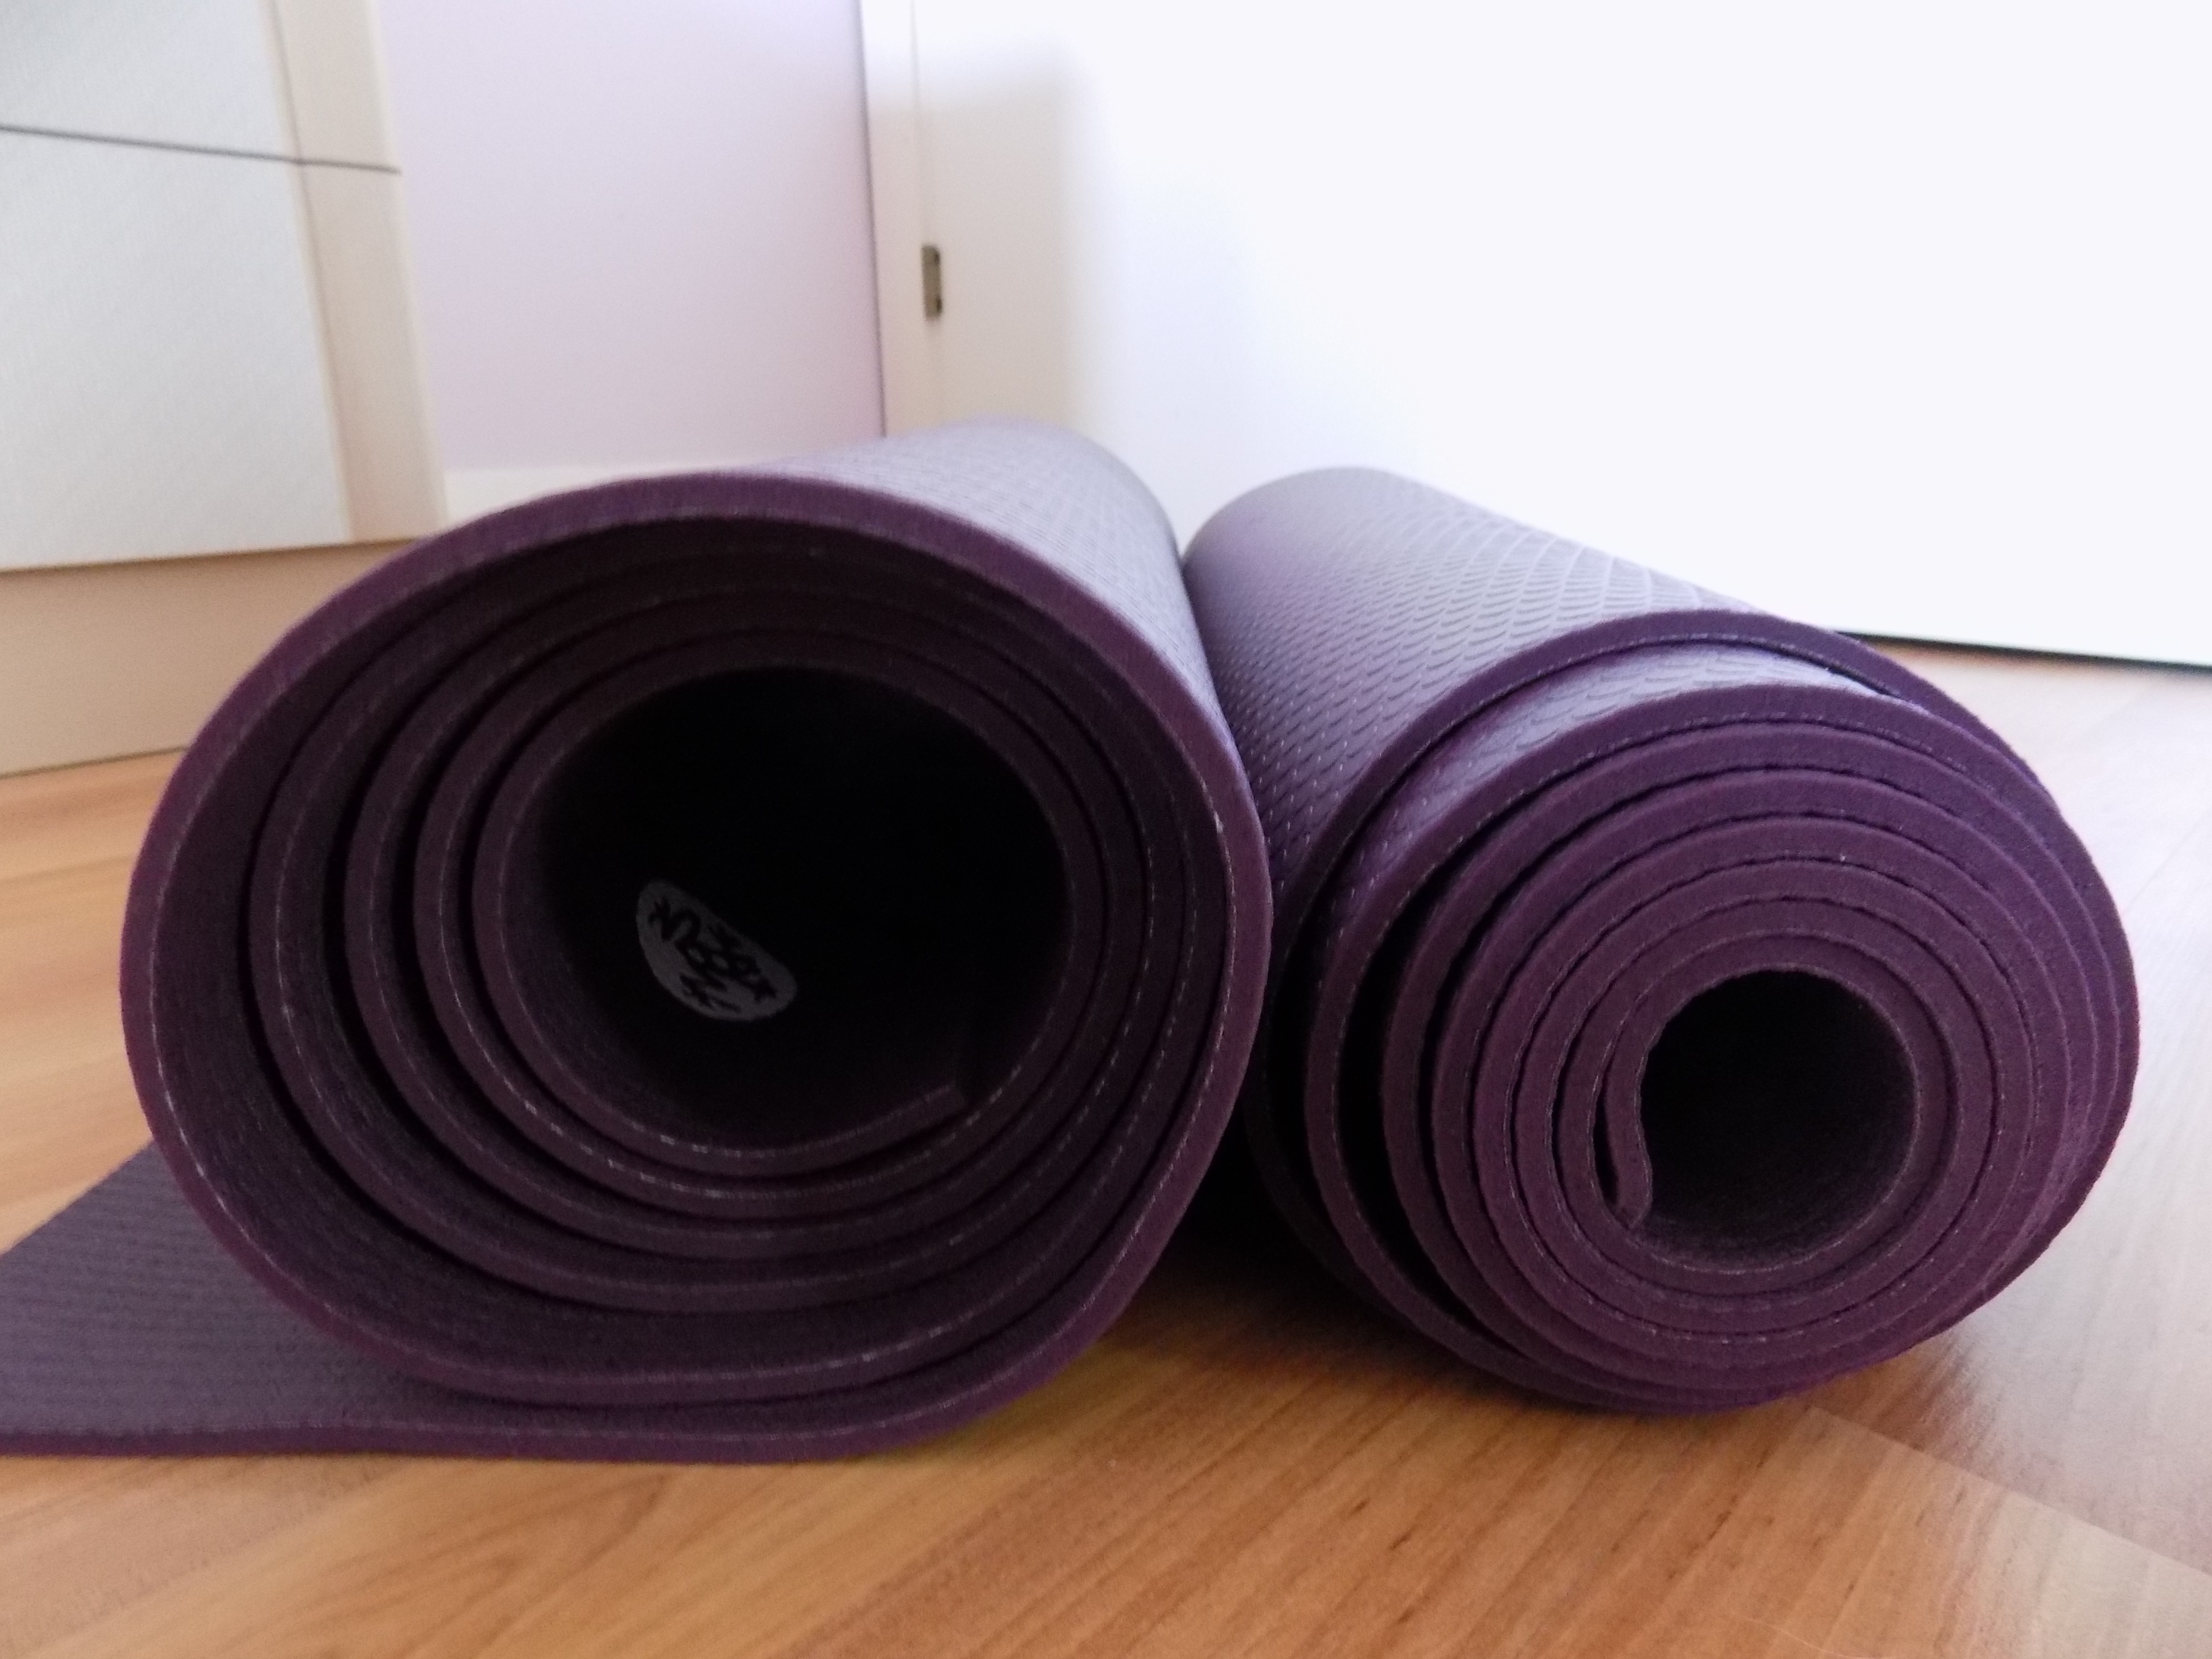 Pilates Mat- What to look for - Freshly Centered